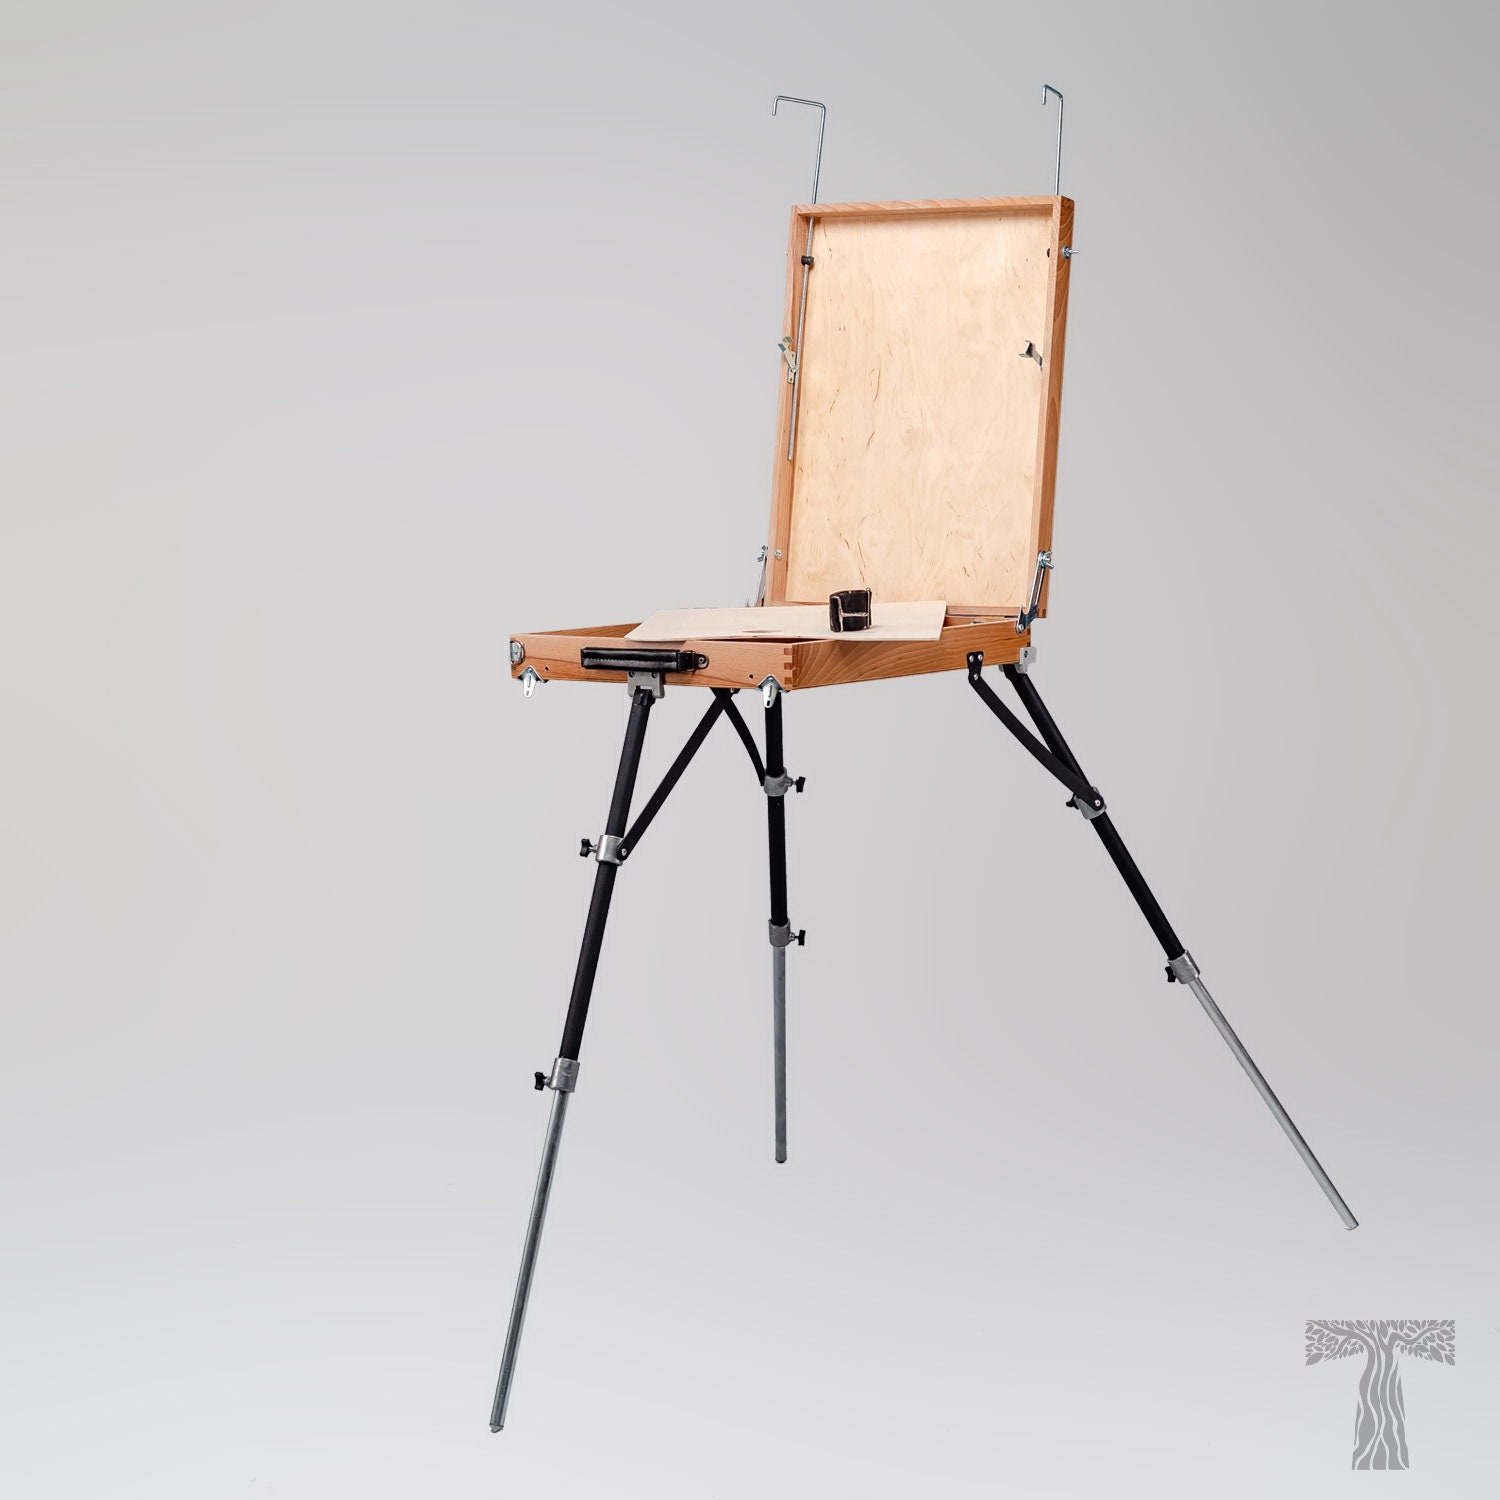 Wood Easel for Floor with Adjustable Top Clamp and Bottom Support Bar -  Black